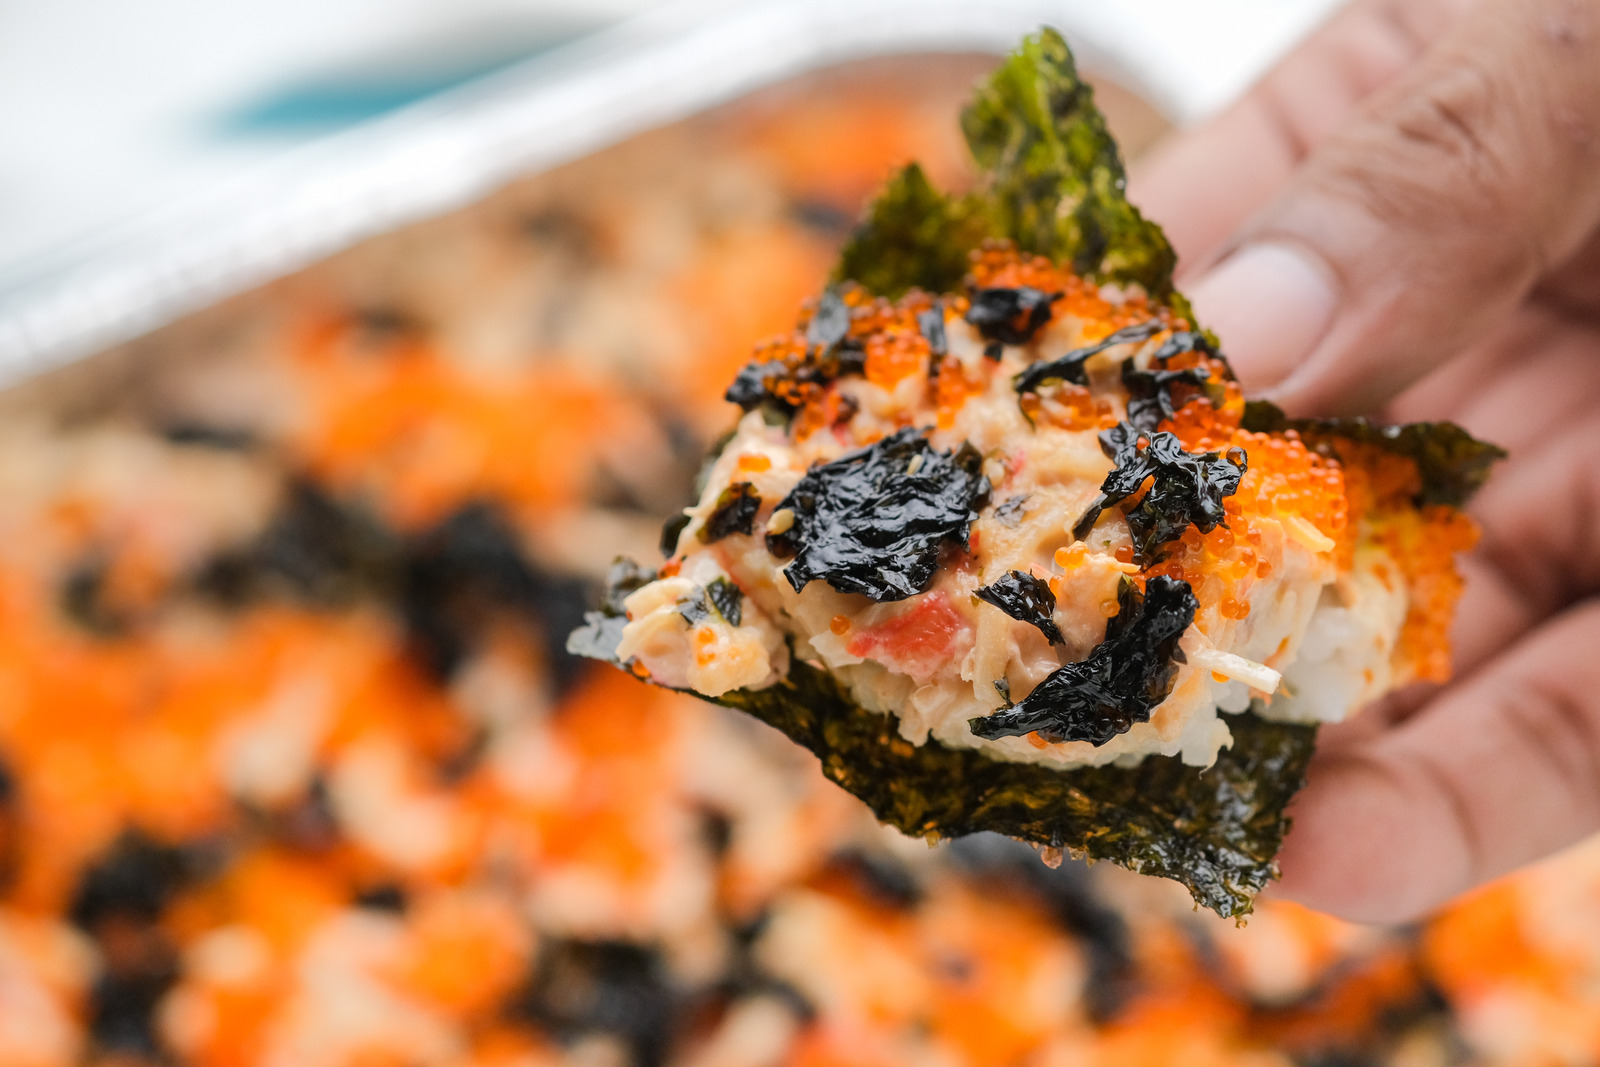 Close-up of a hand holding a piece of bake salmon sushi topped with fish roe and seaweed.